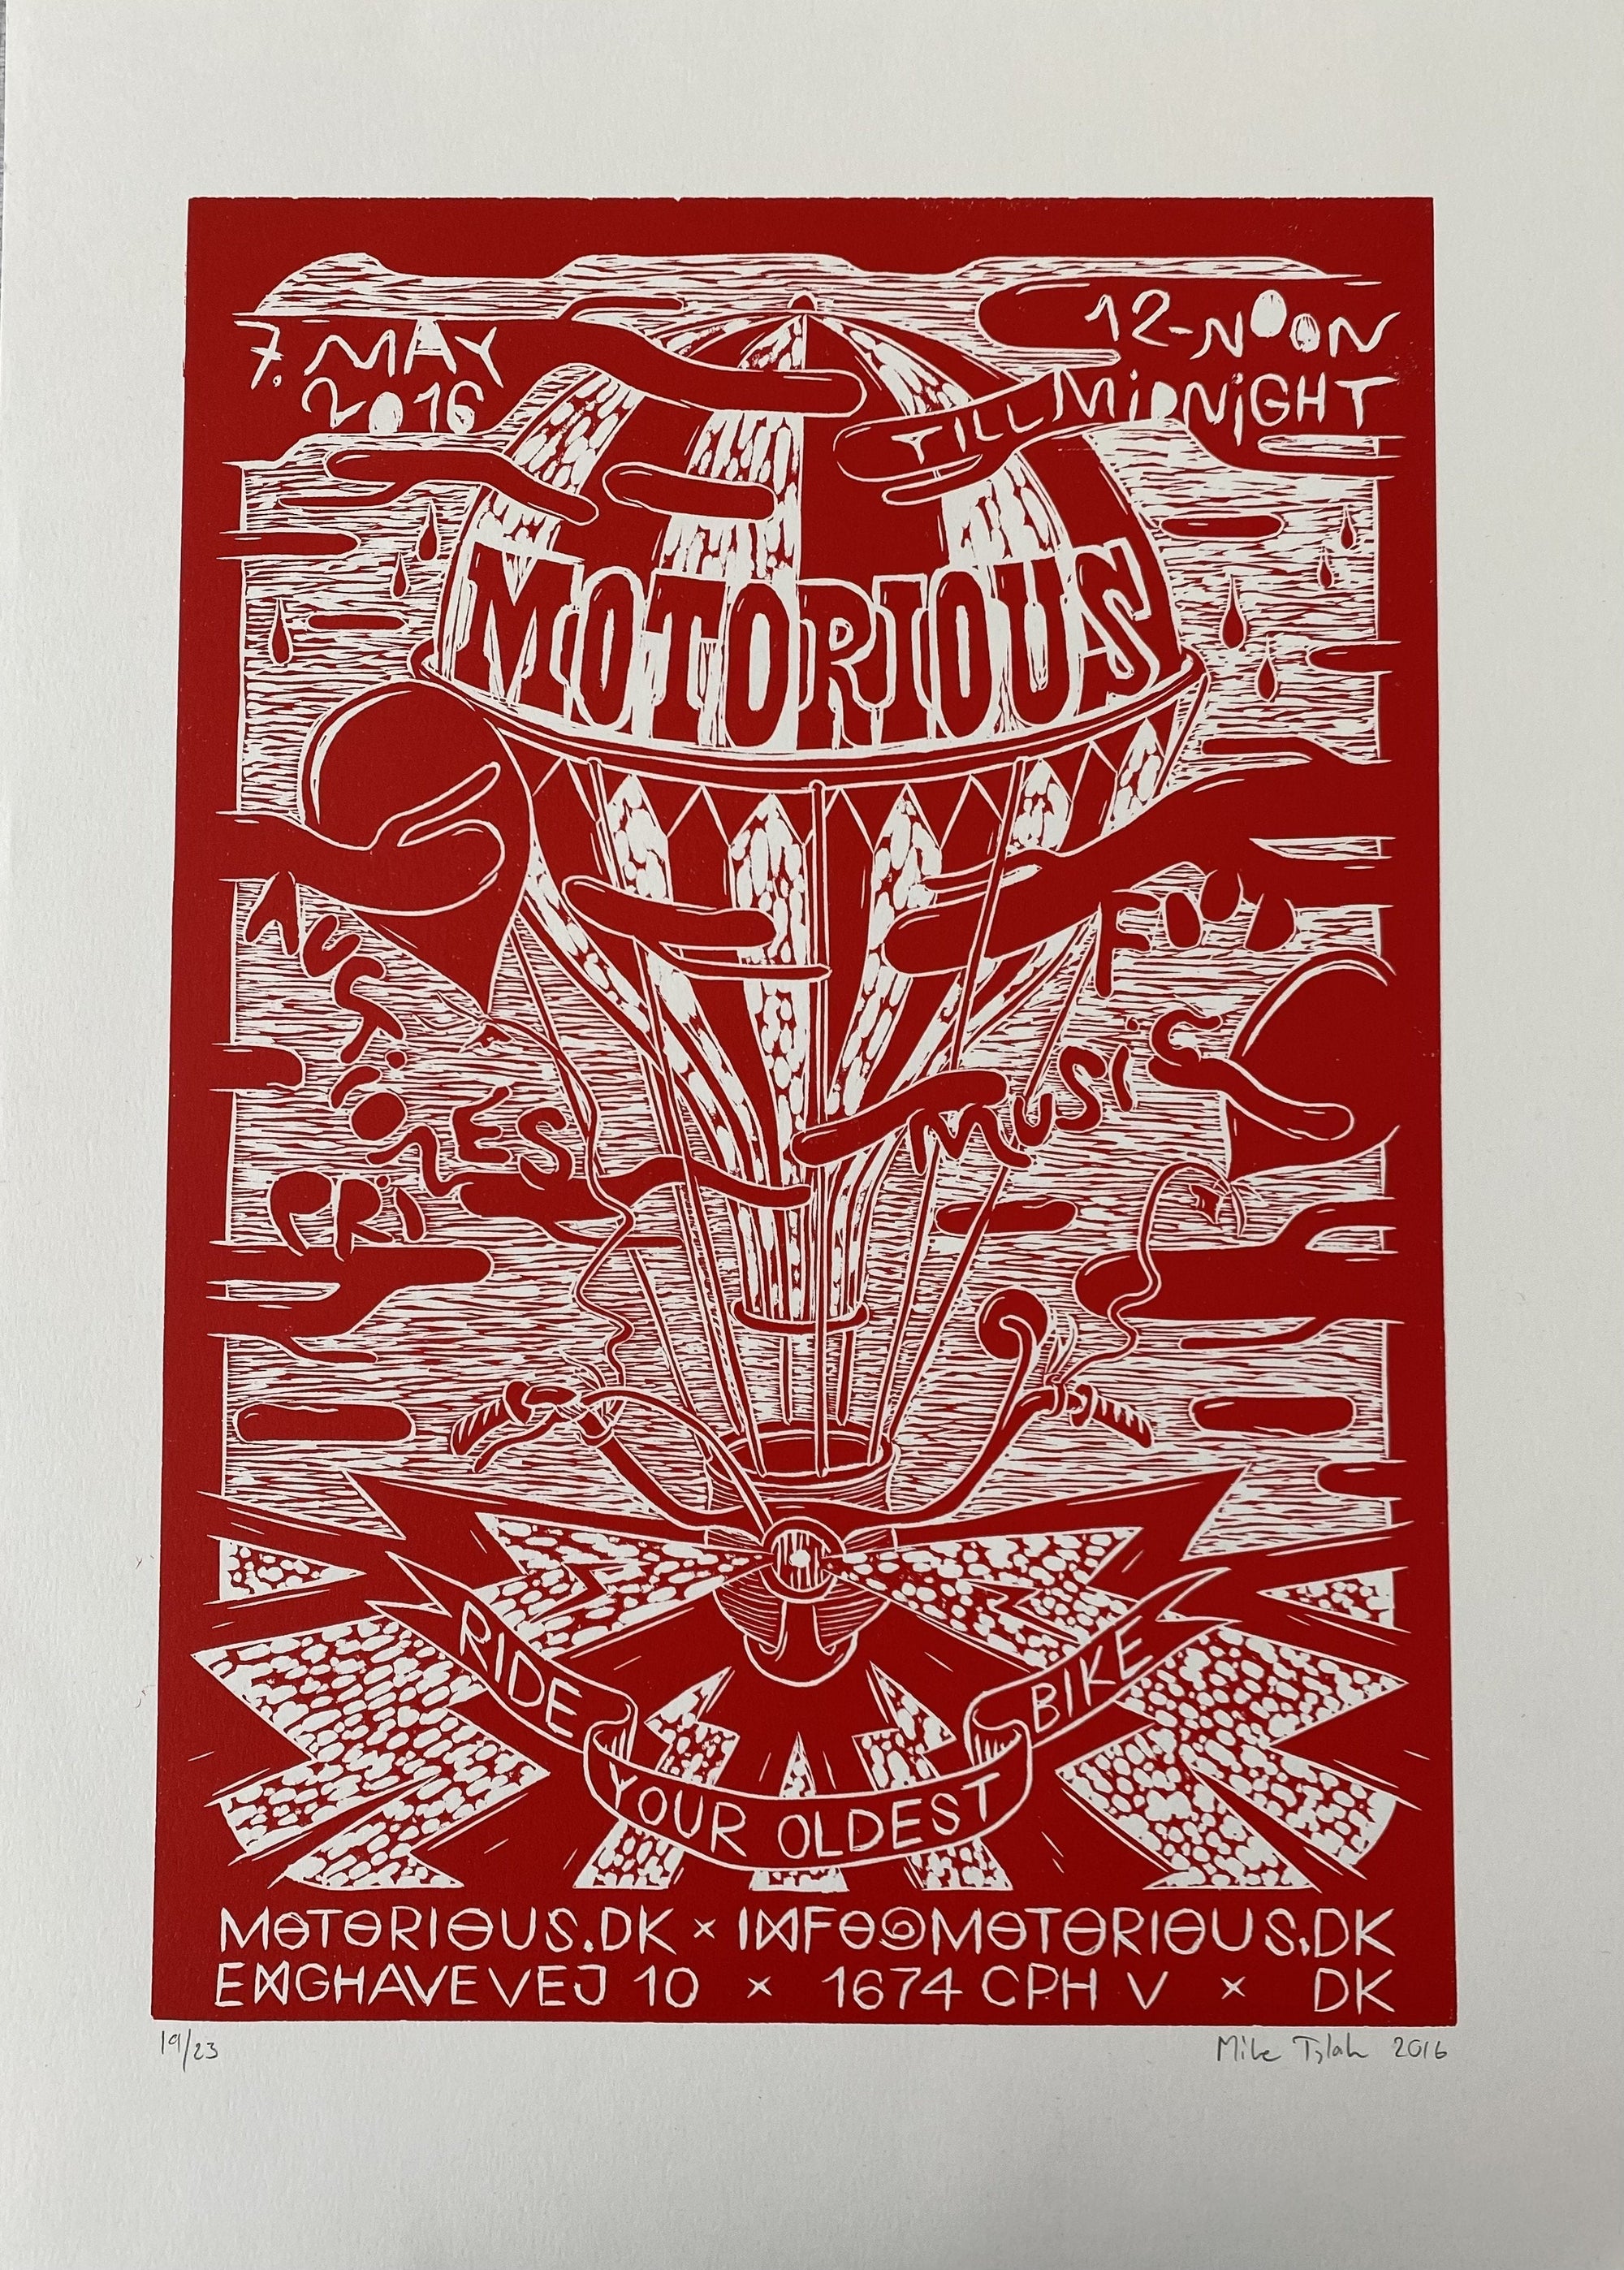 2016 Motorious lino-cut by Mike Tylak, A3 oversize, Red on Off-white-Linoleumstryk og Plakater-Motorious Copenhagen-Motorious Copenhagen